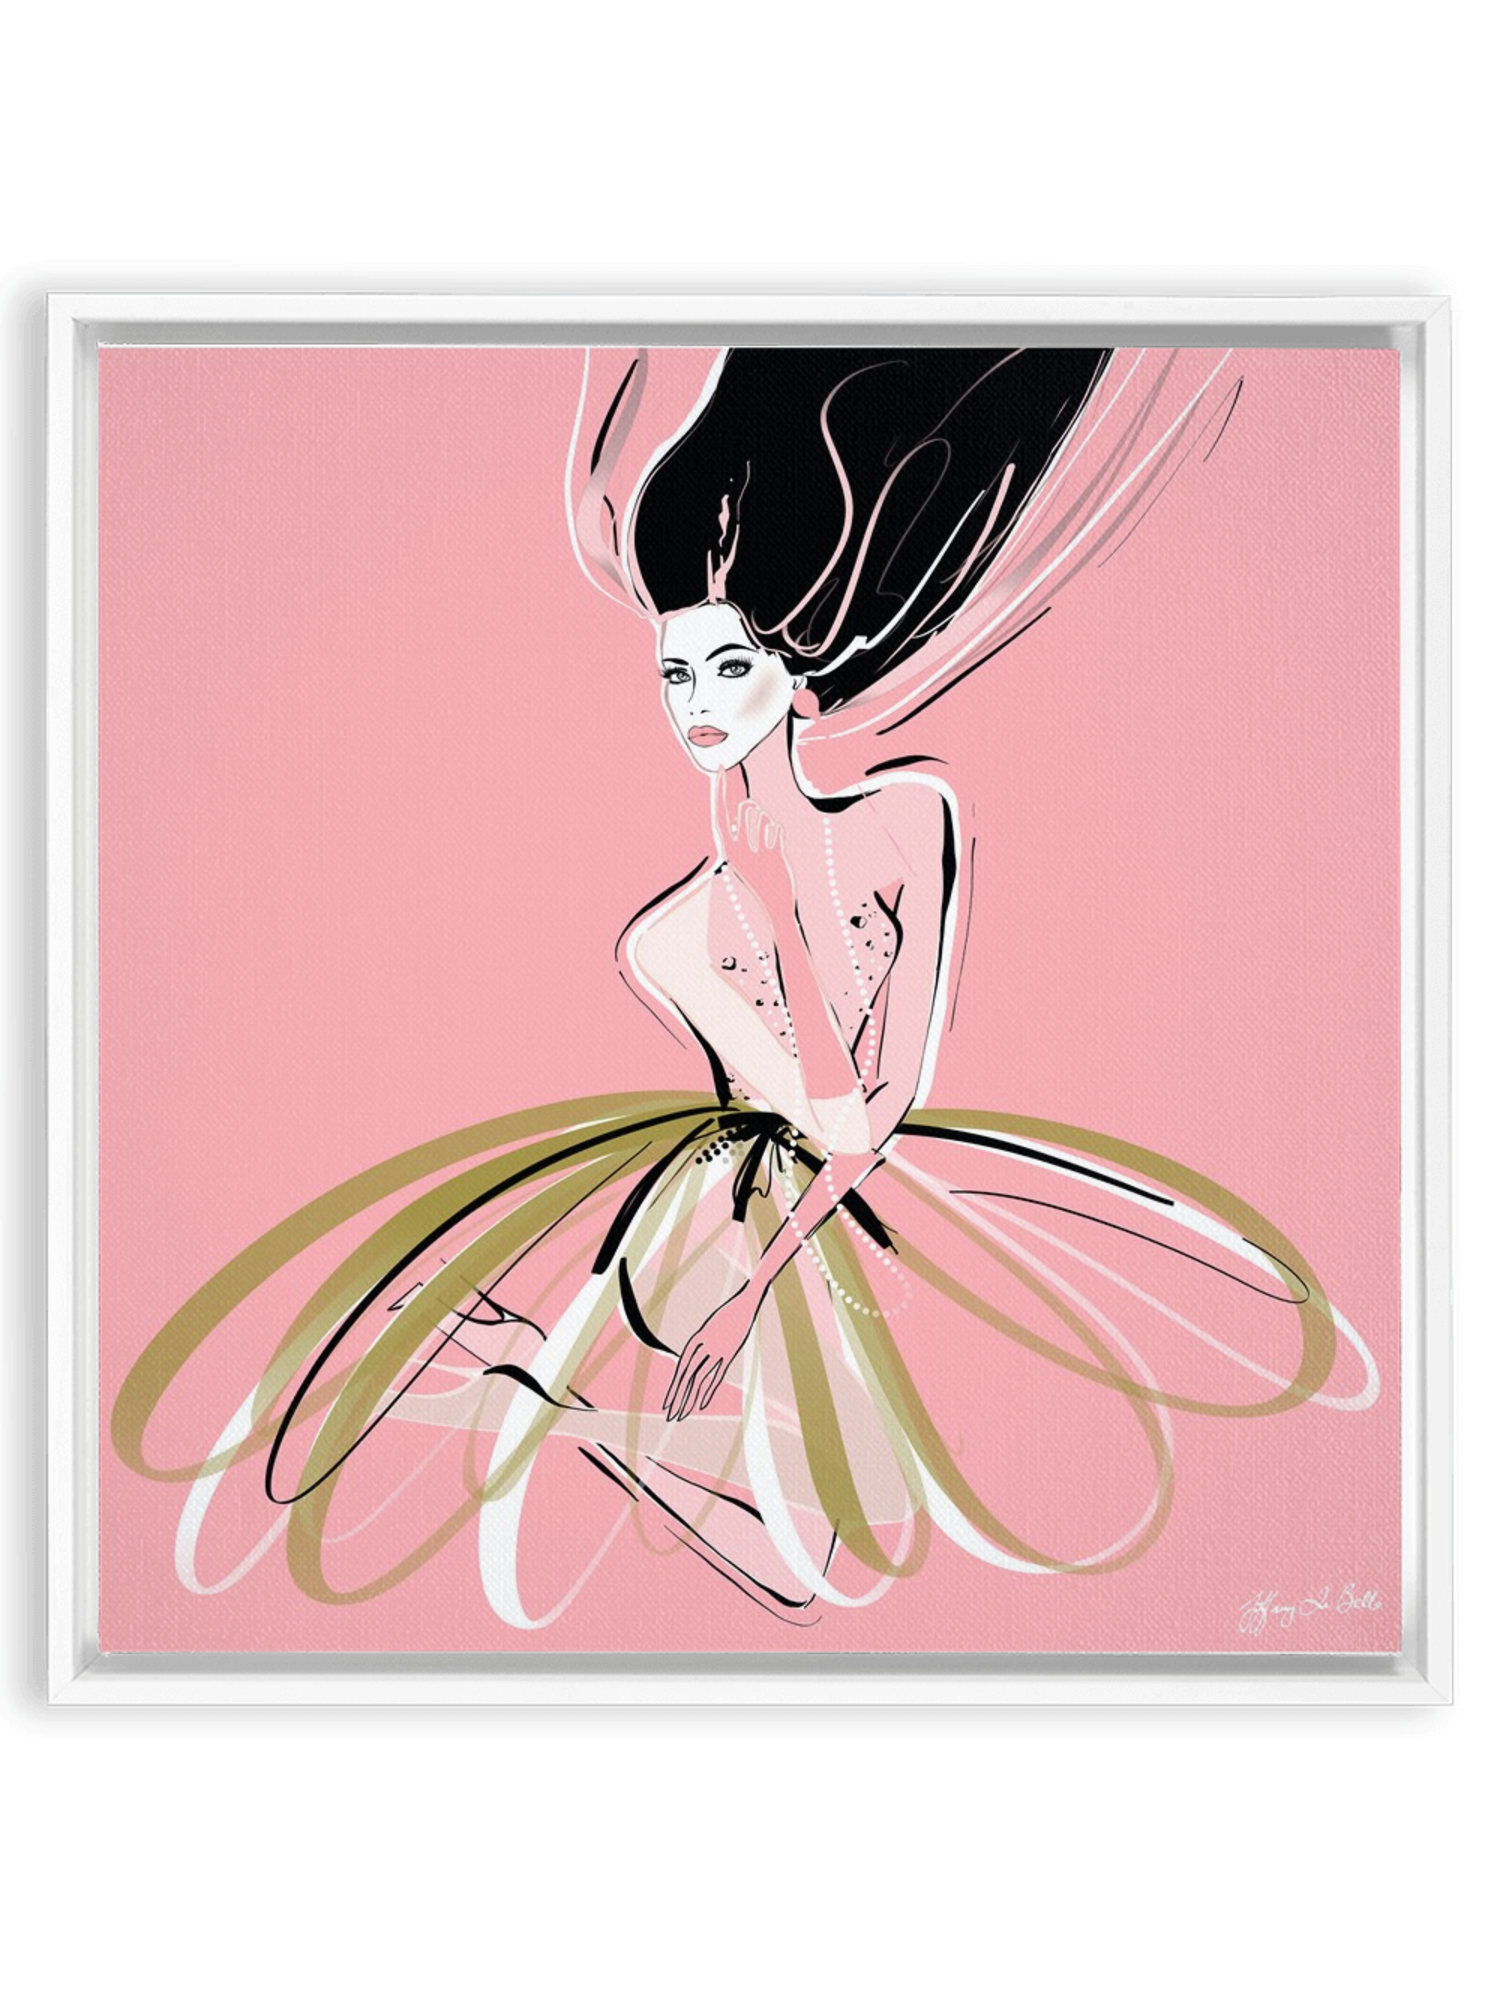 Pink and Pearls - Illustration - Canvas Gallery Print - Unframed or Framed - Tiffany La Belle